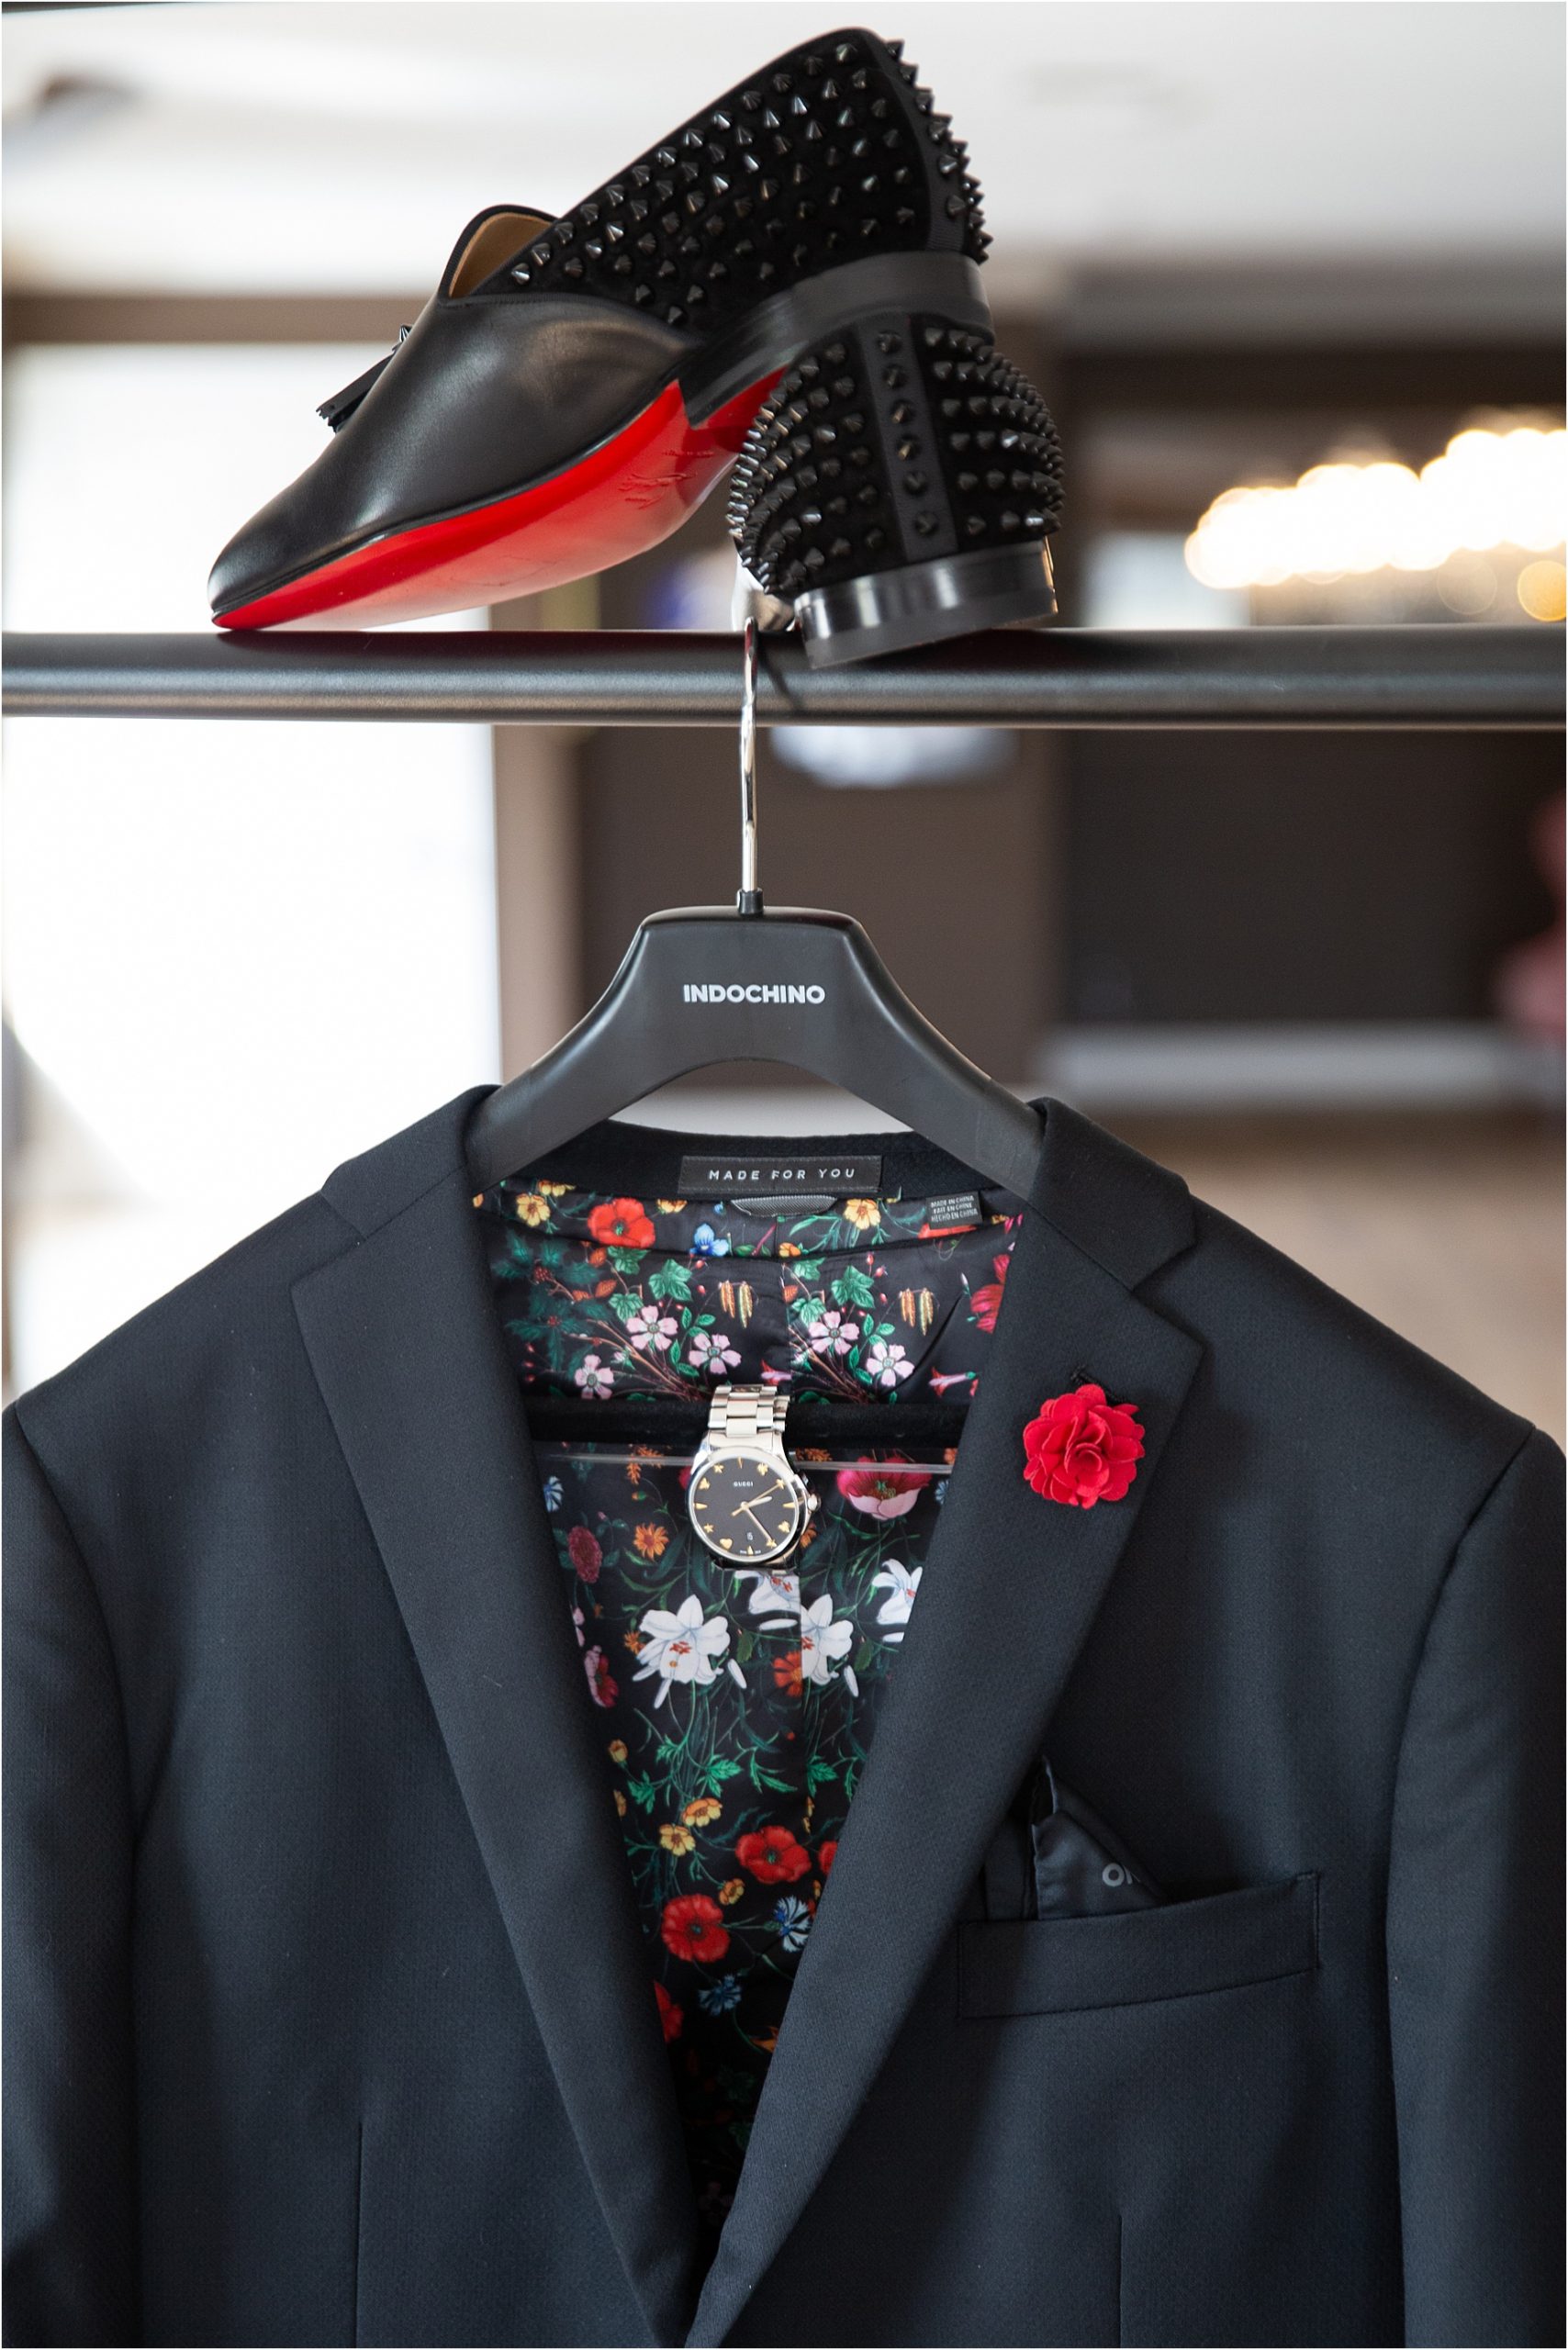 Indochino Wedding Suit for the Groom and Louboutin Mens Shoes